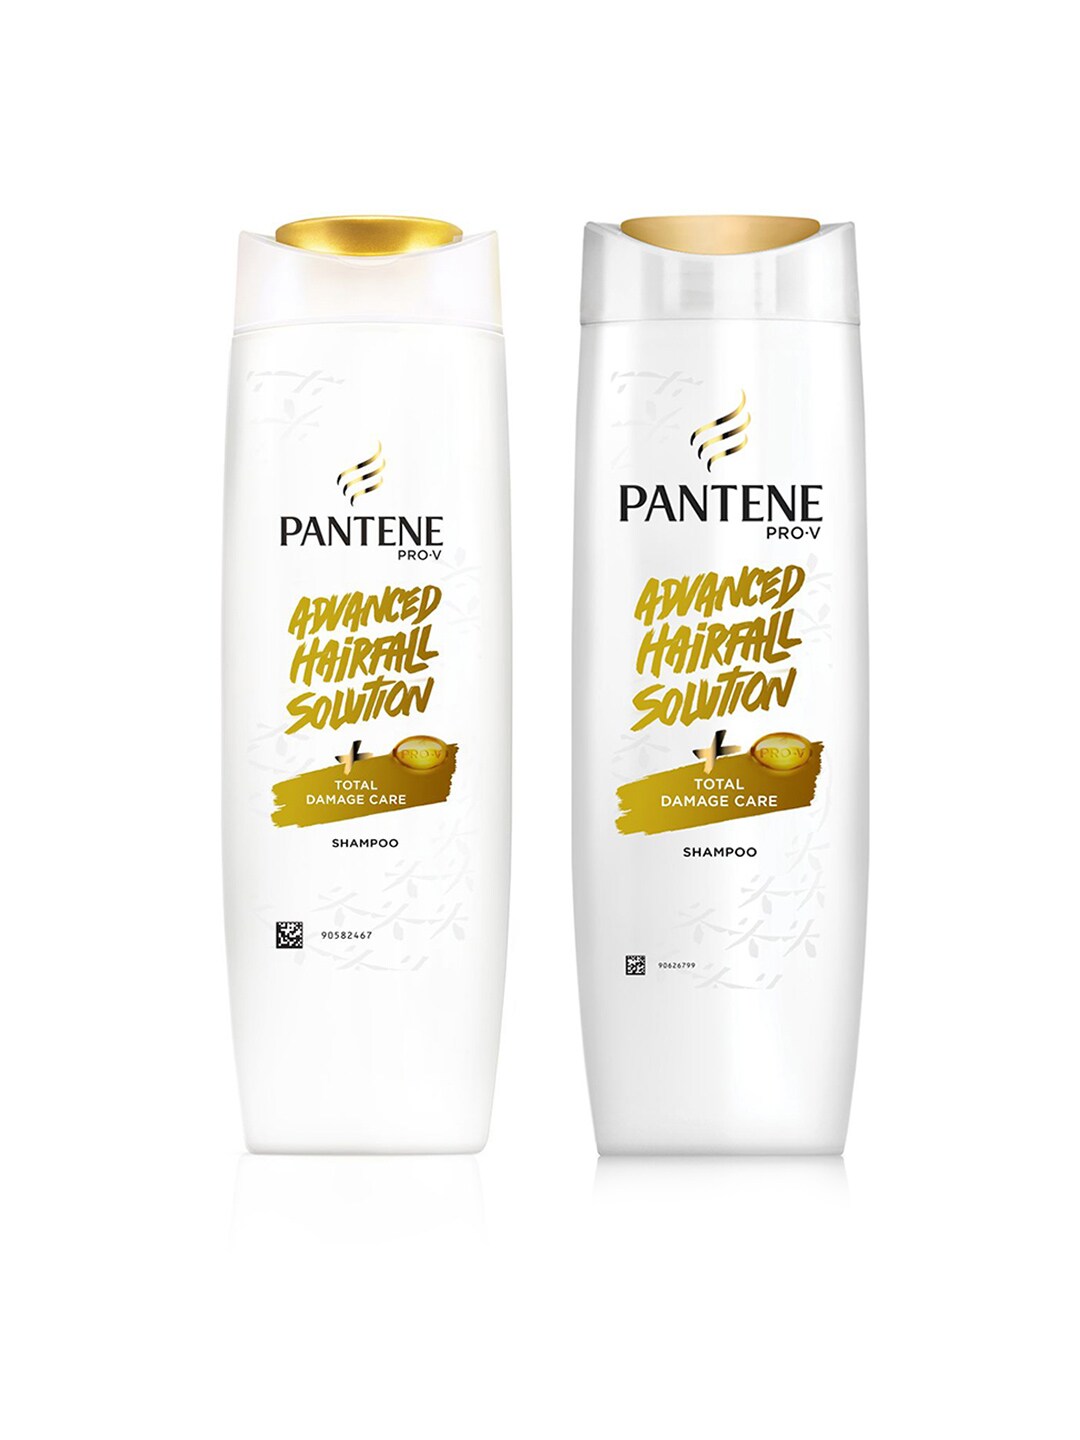 Pantene Set of 2 Advanced Hair Fall Solution Total Damage Care Shampoos Price in India